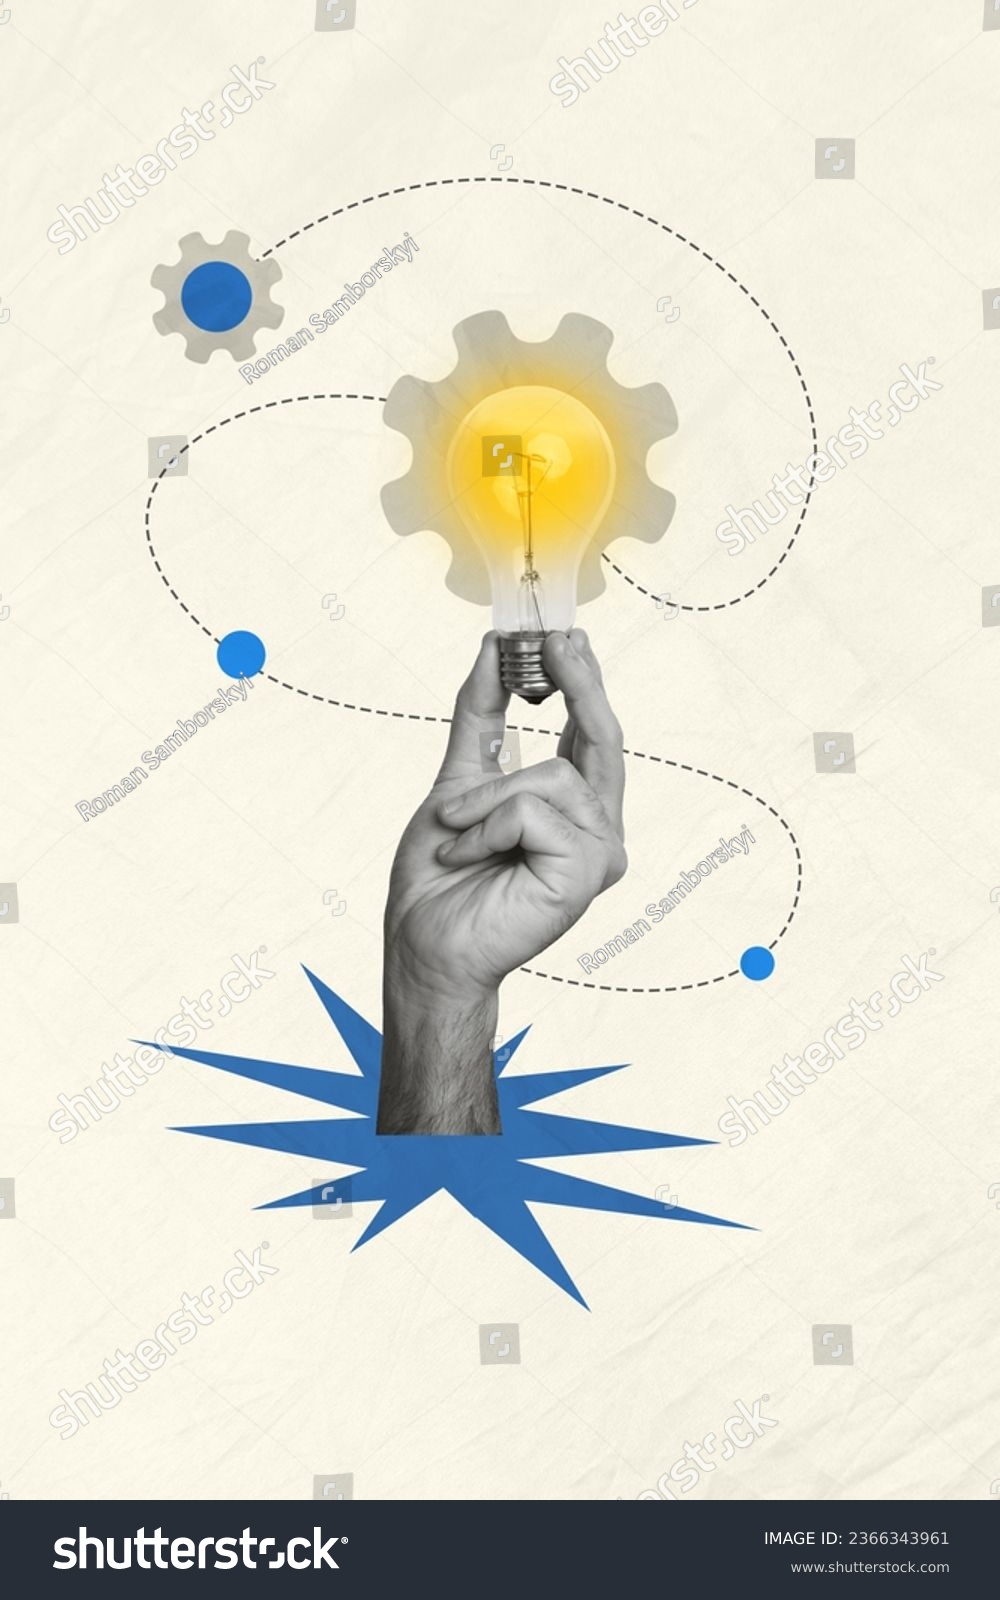 Poster collage conceptual photo image of human arm hold lamp bulb brillint ide great plan conclusion solution isolated on drawing background #2366343961